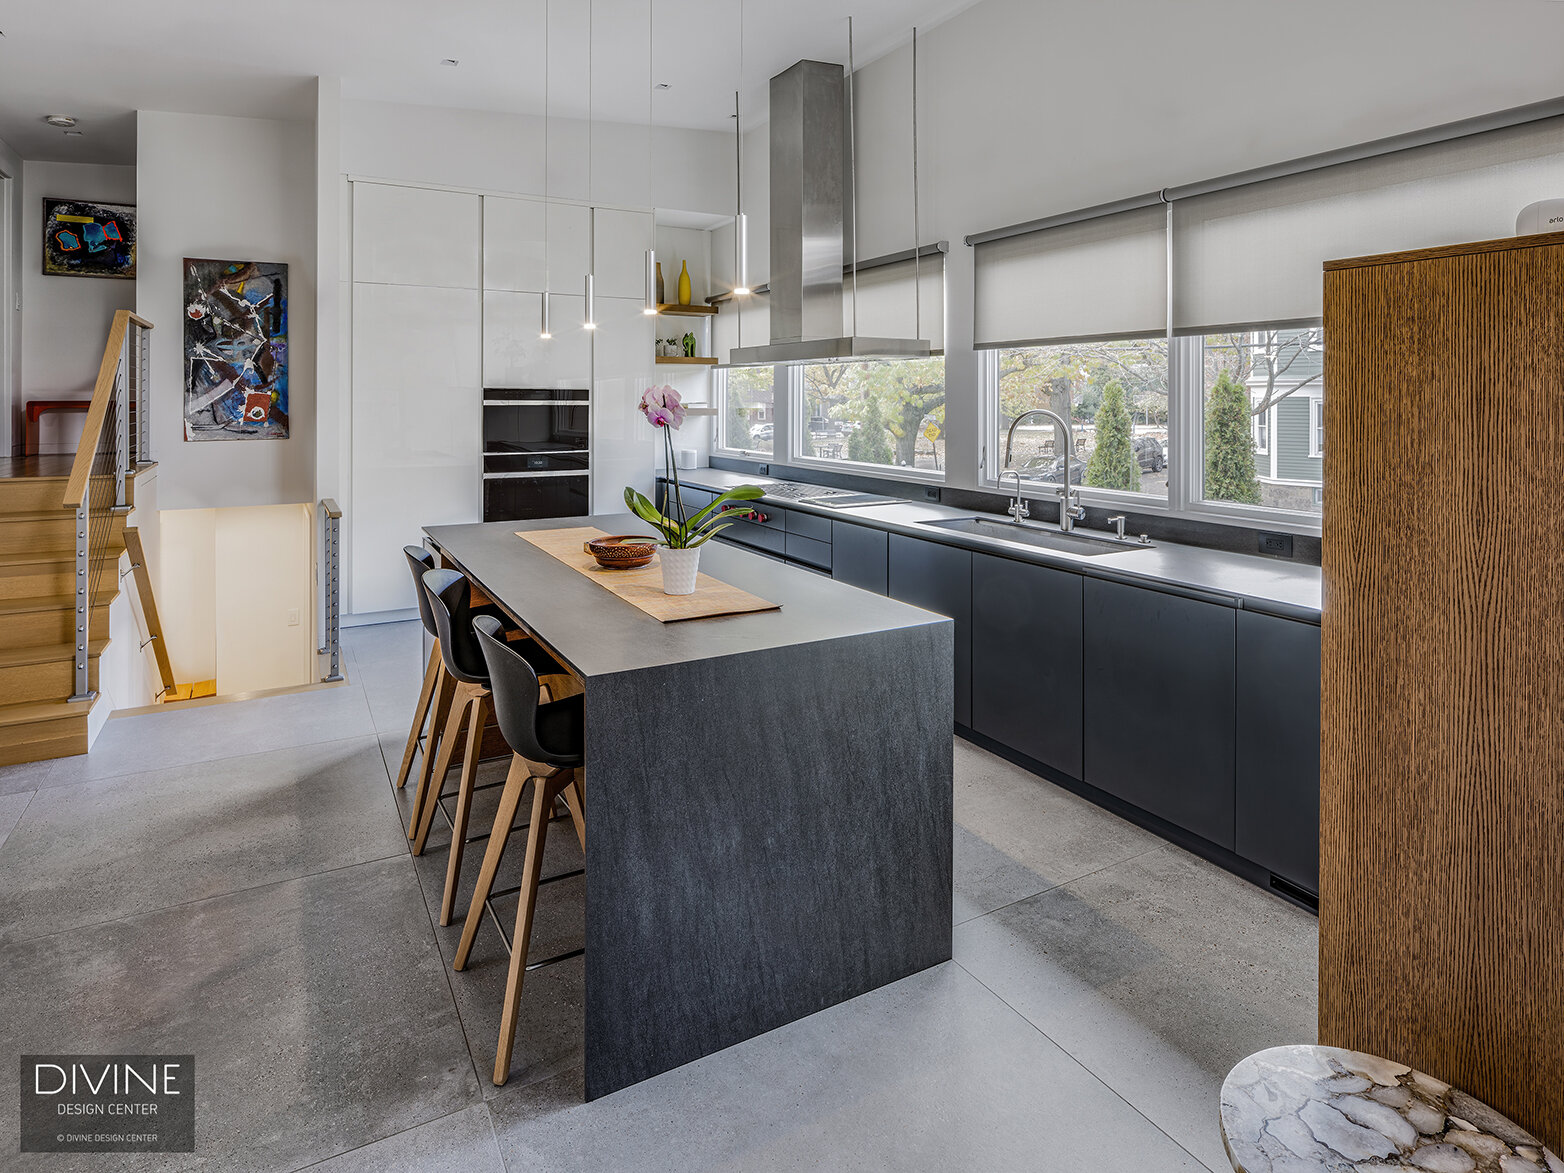  black Leicht kitchen with complementing dark hardwood veneer and white, high gloss accent cabinet fronts. Waterfall kitchen island top with stainless steel appliances and hood. Concrete floors, a paneled refrigerator, handleless cabinets, and large 